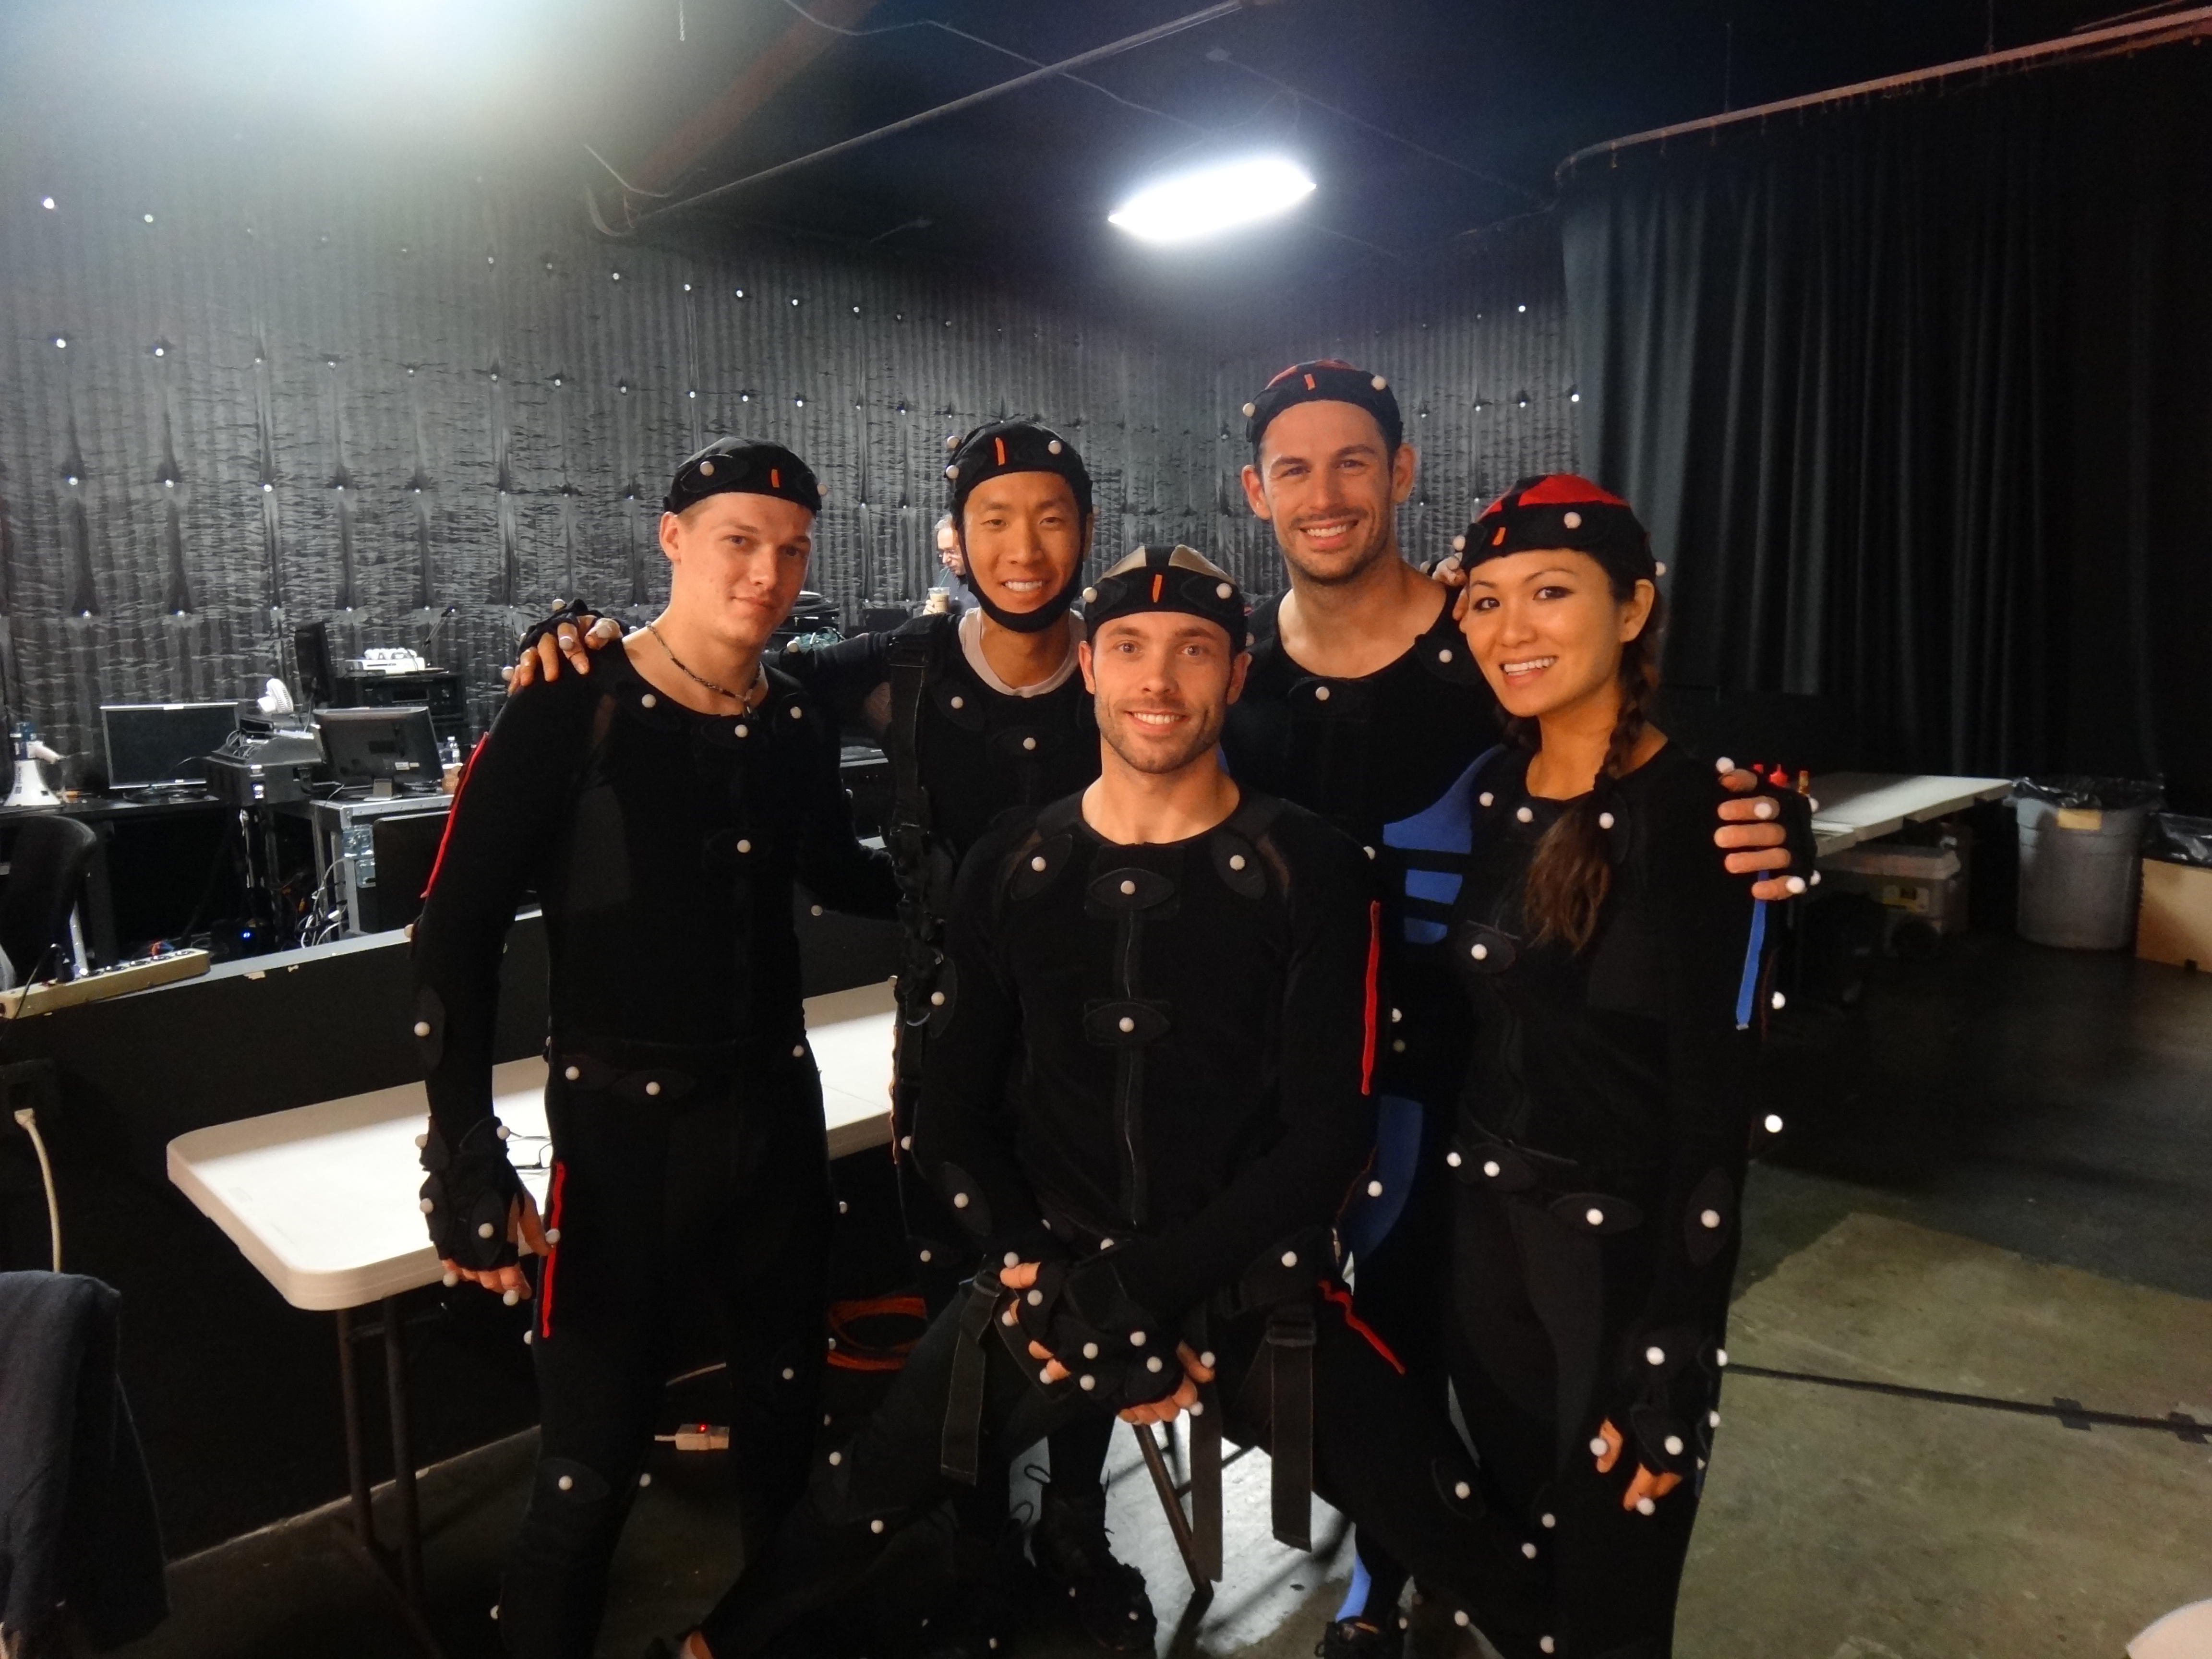 Motion capture crew for Kinect Star Wars video game